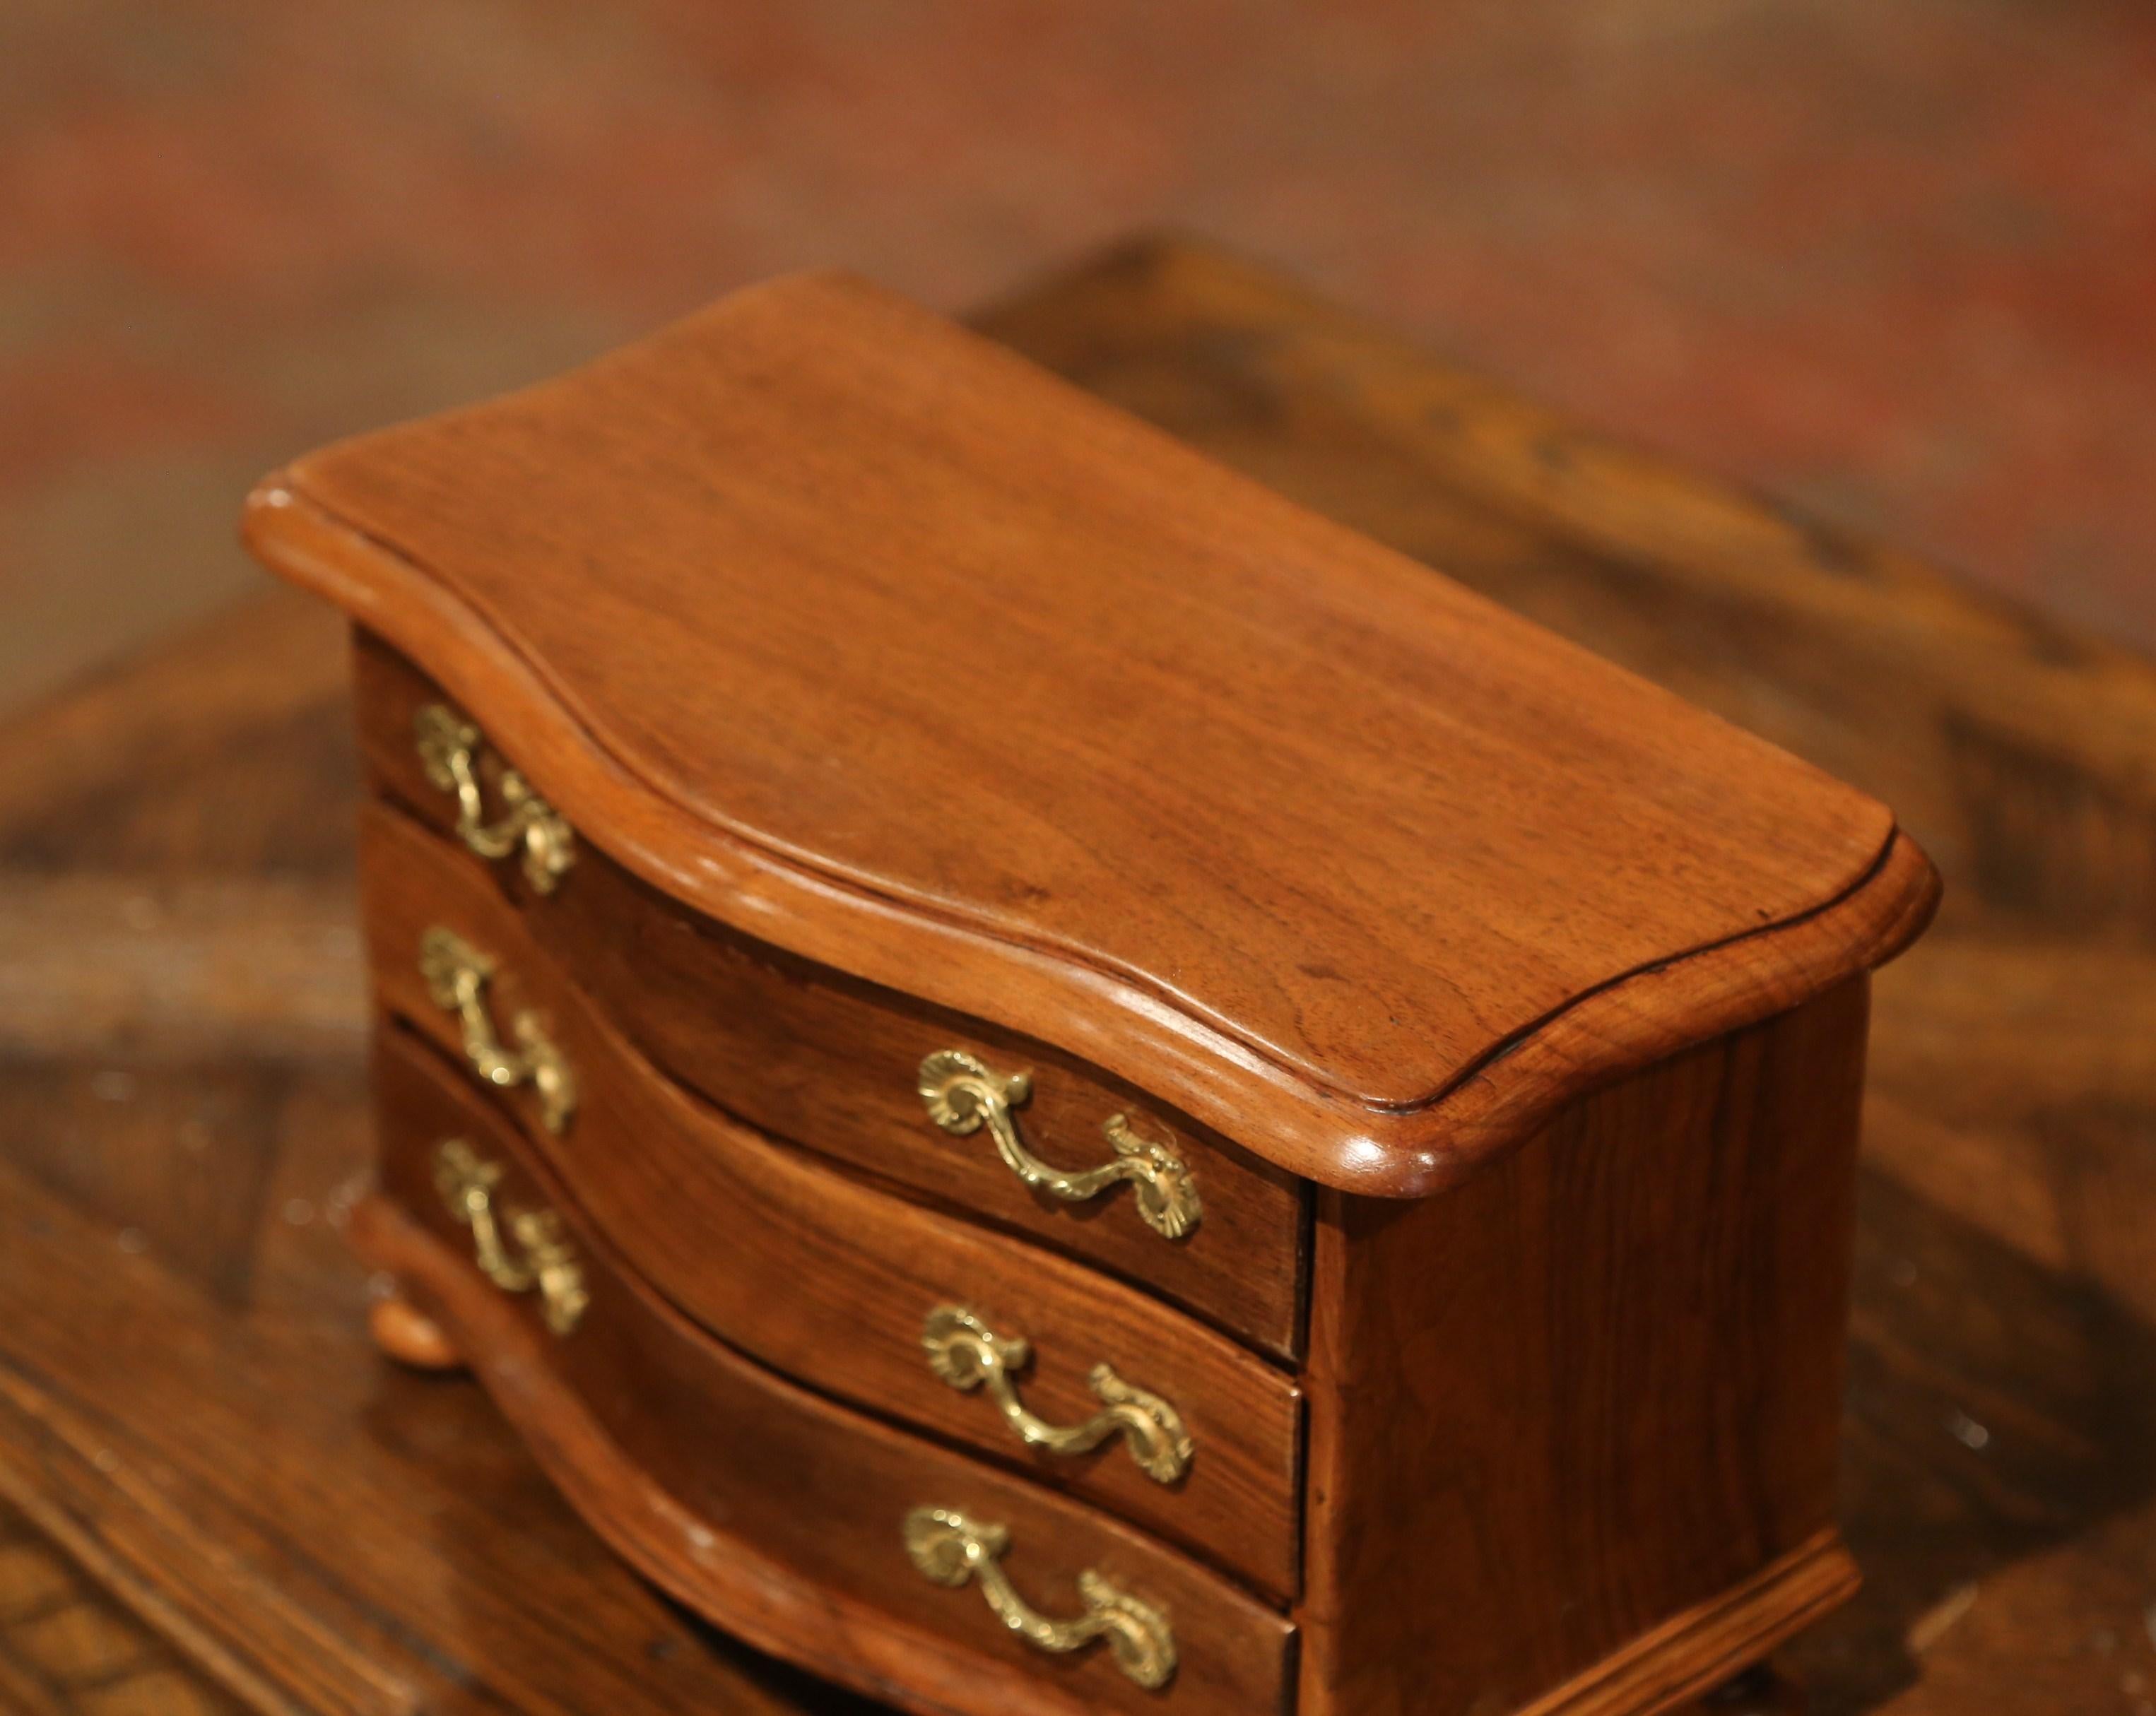 Patinated Early 20th Century French Louis XIV Carved Walnut Bombe Miniature Commode Chest For Sale